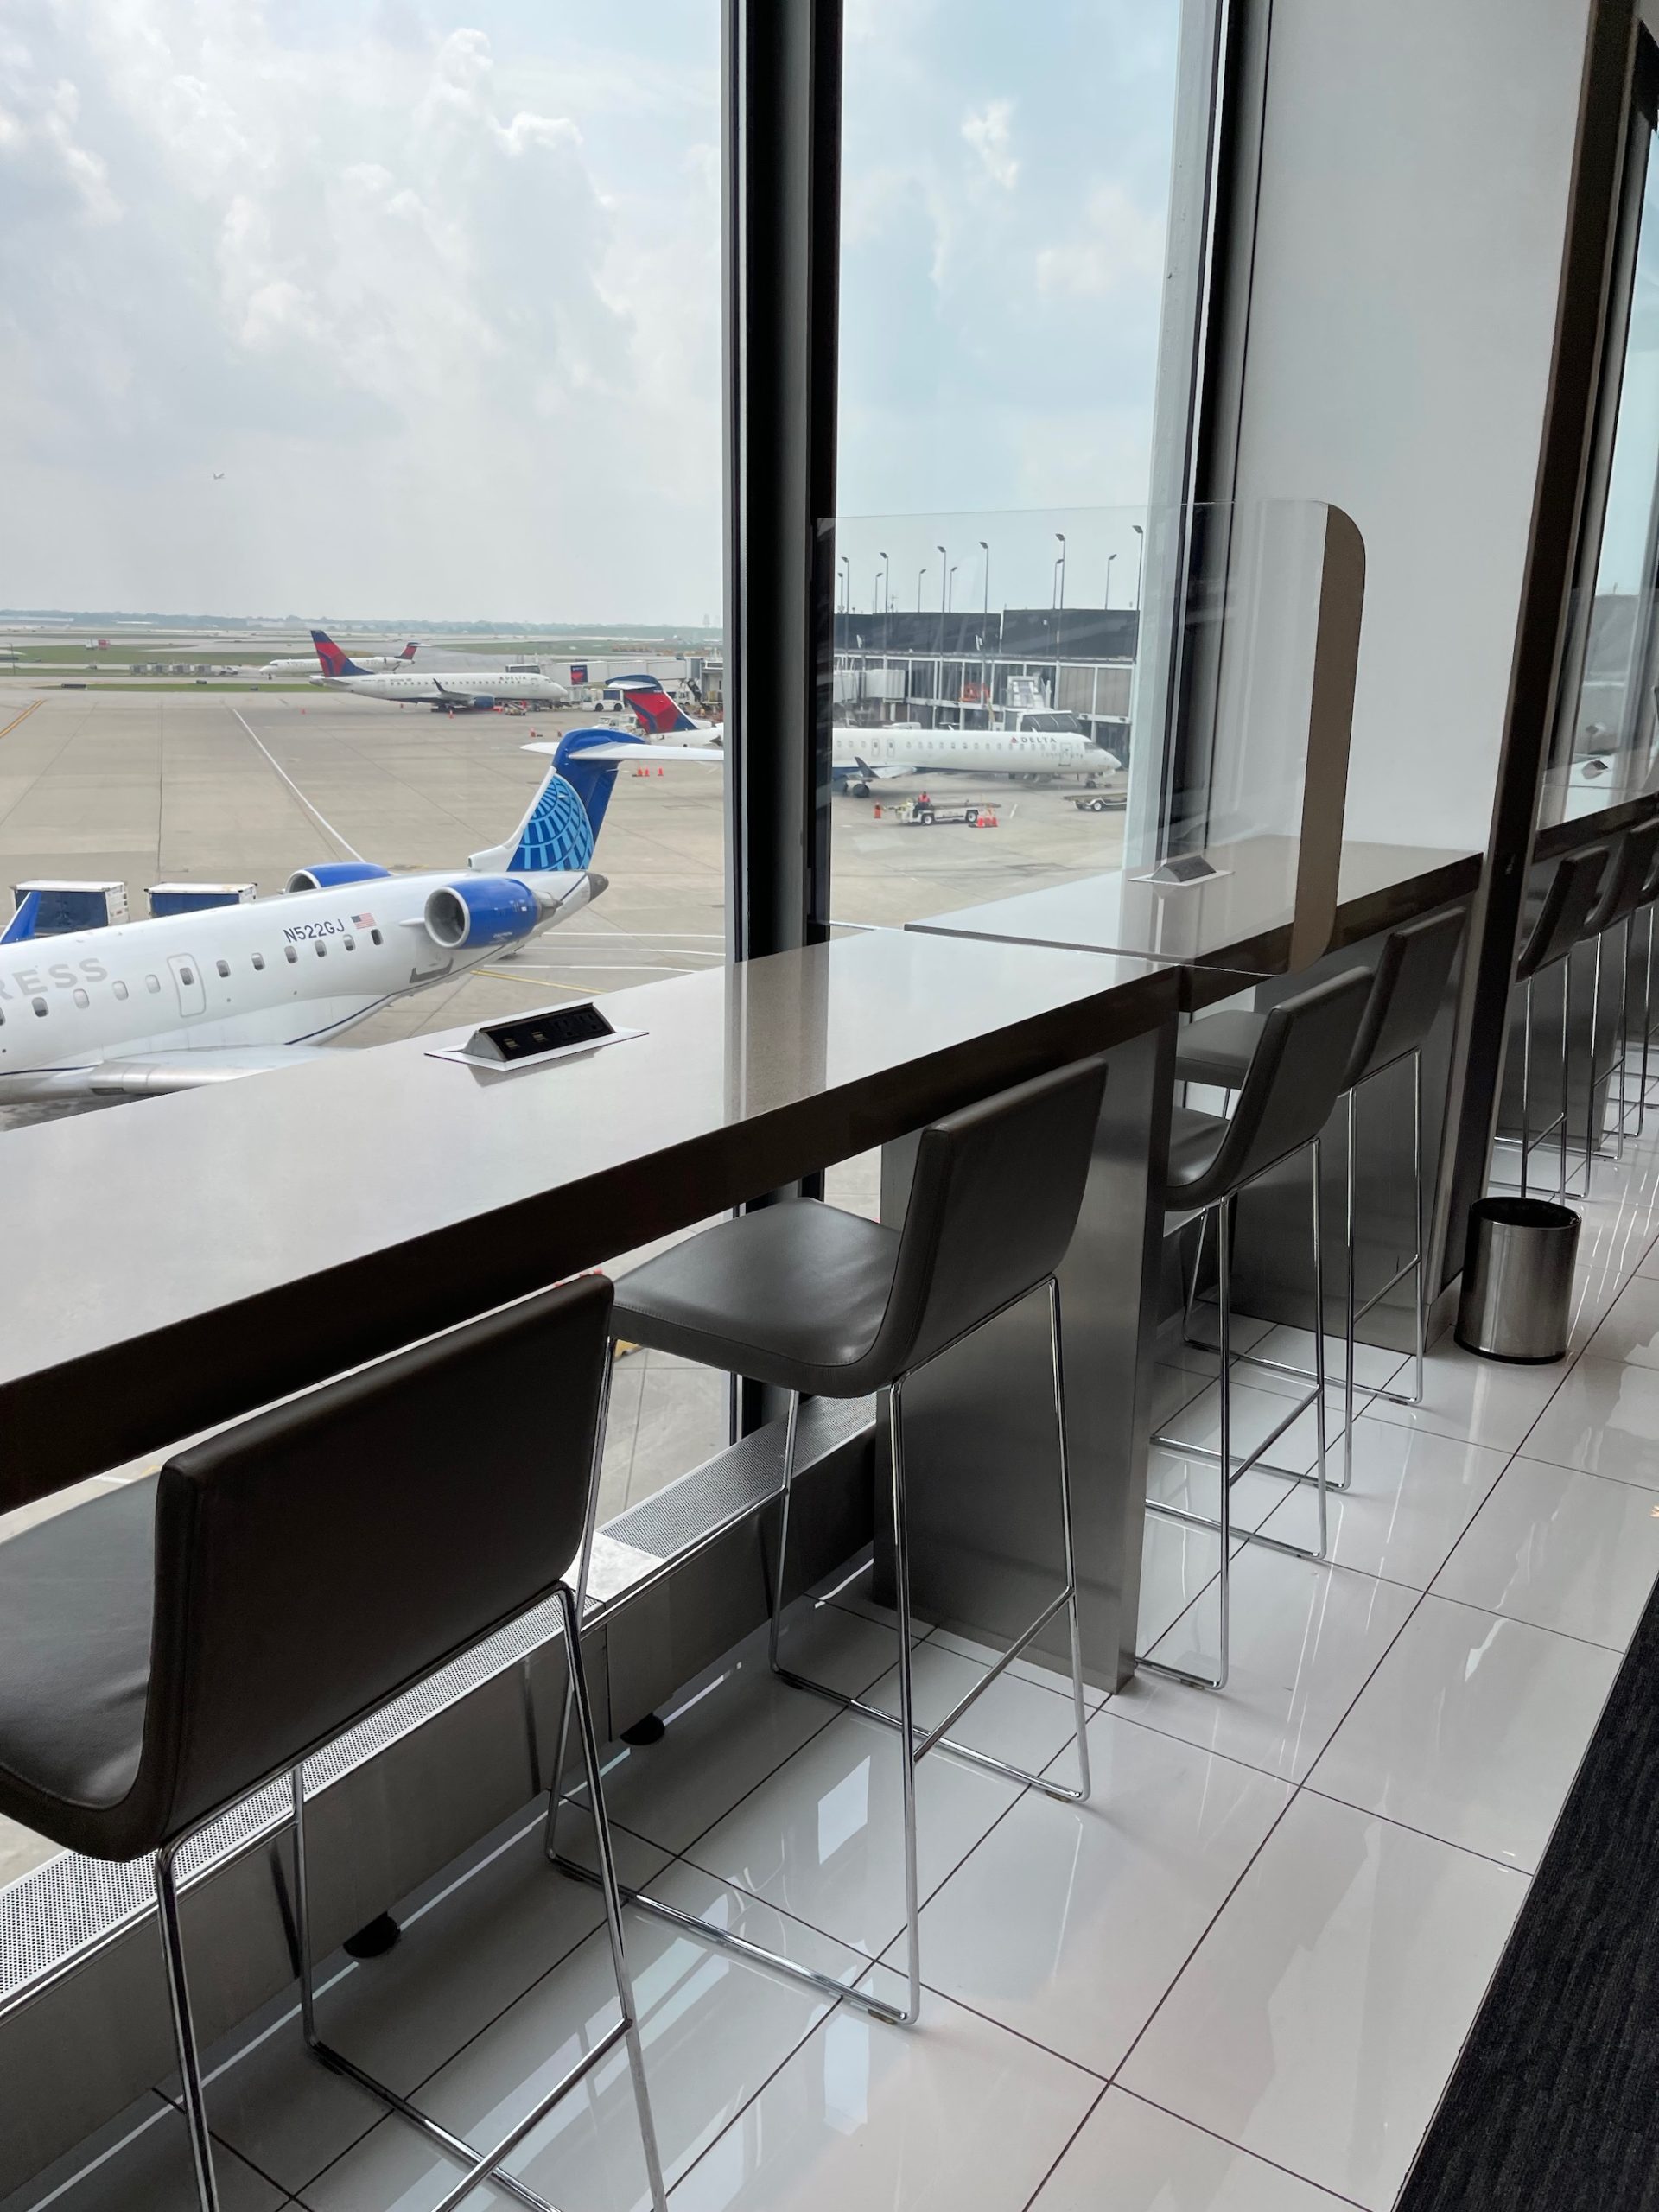 a table with chairs and a window with planes in the background